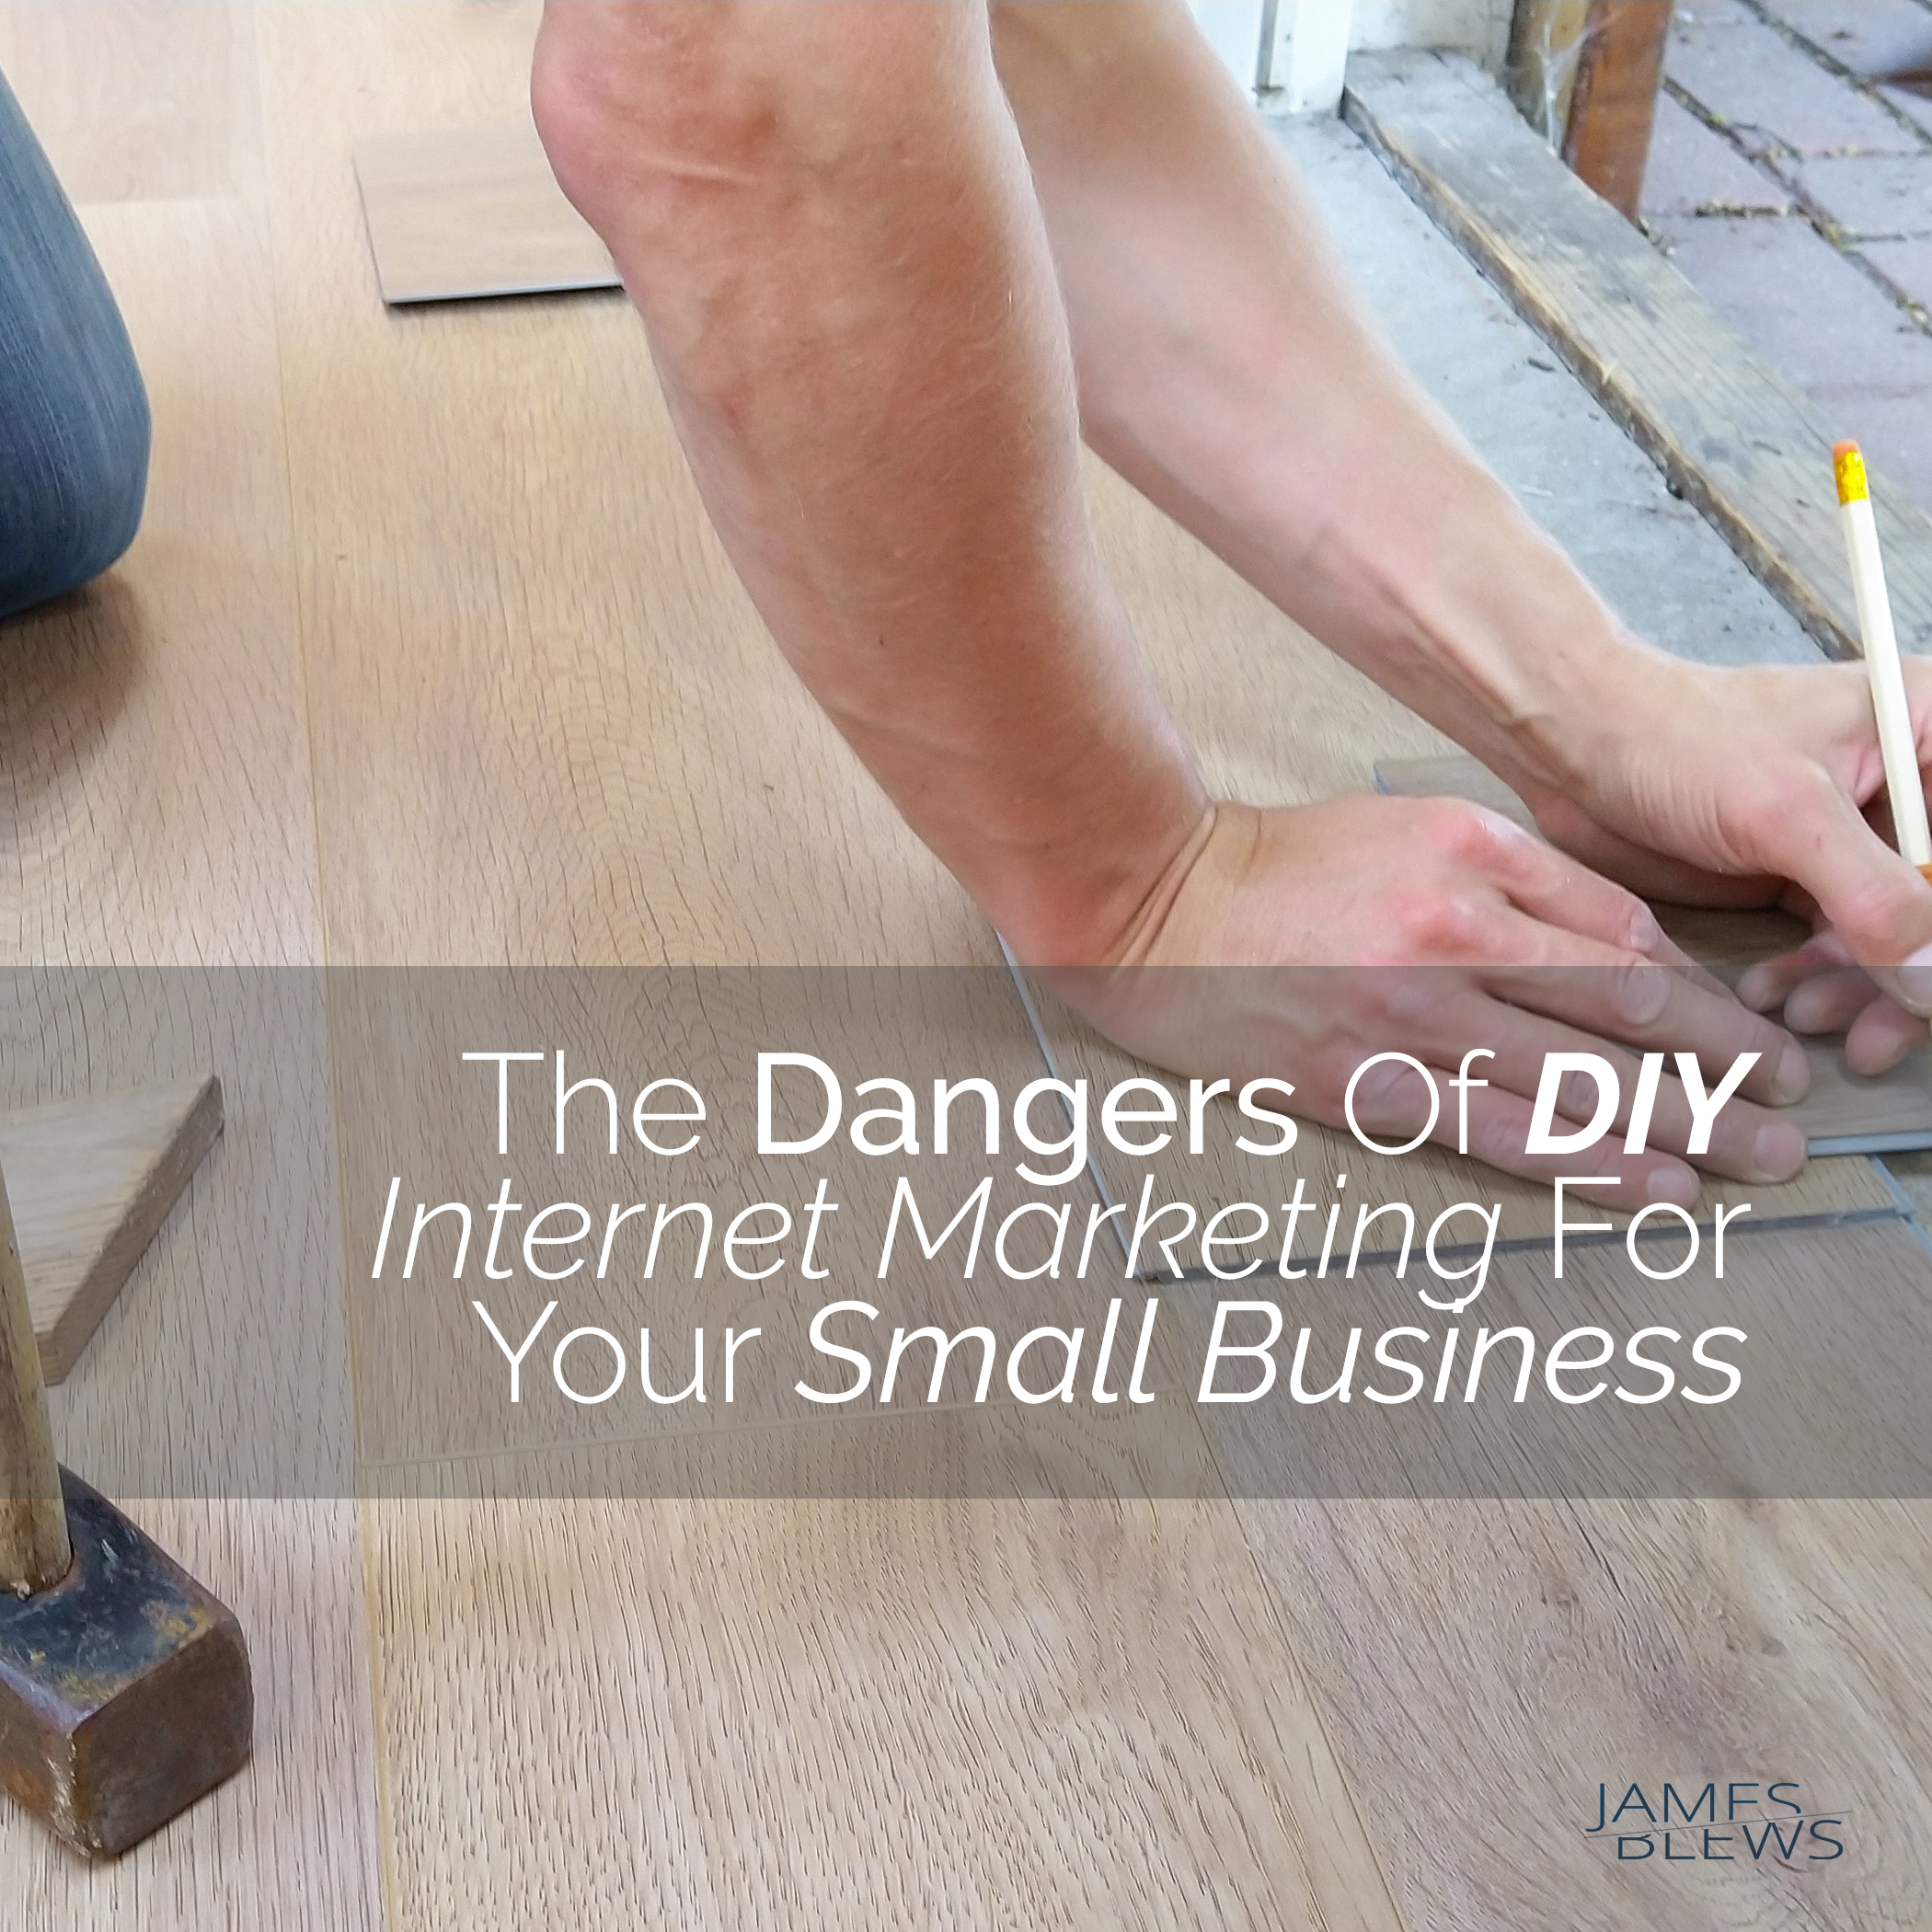 The Dangers of DIY Internet Marketing for Small Business (and how to get it done right!)